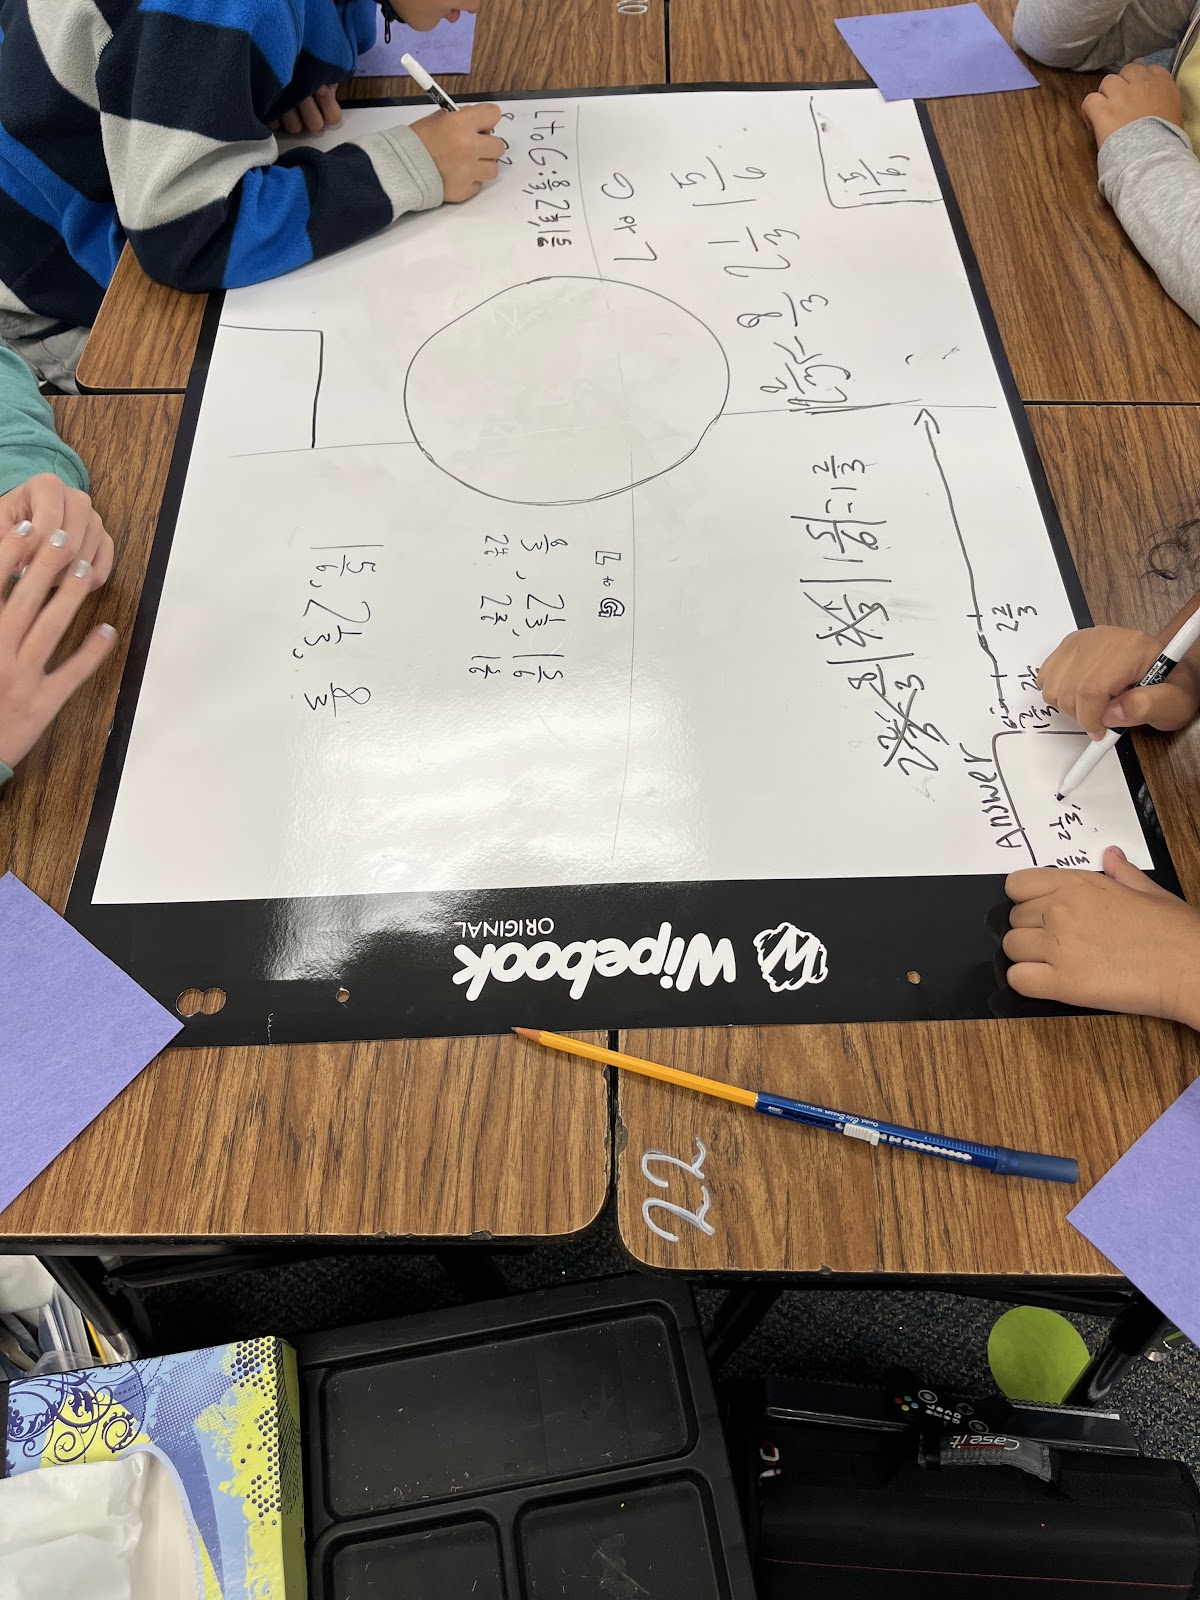 Students work on a Flipchart while seated around a table